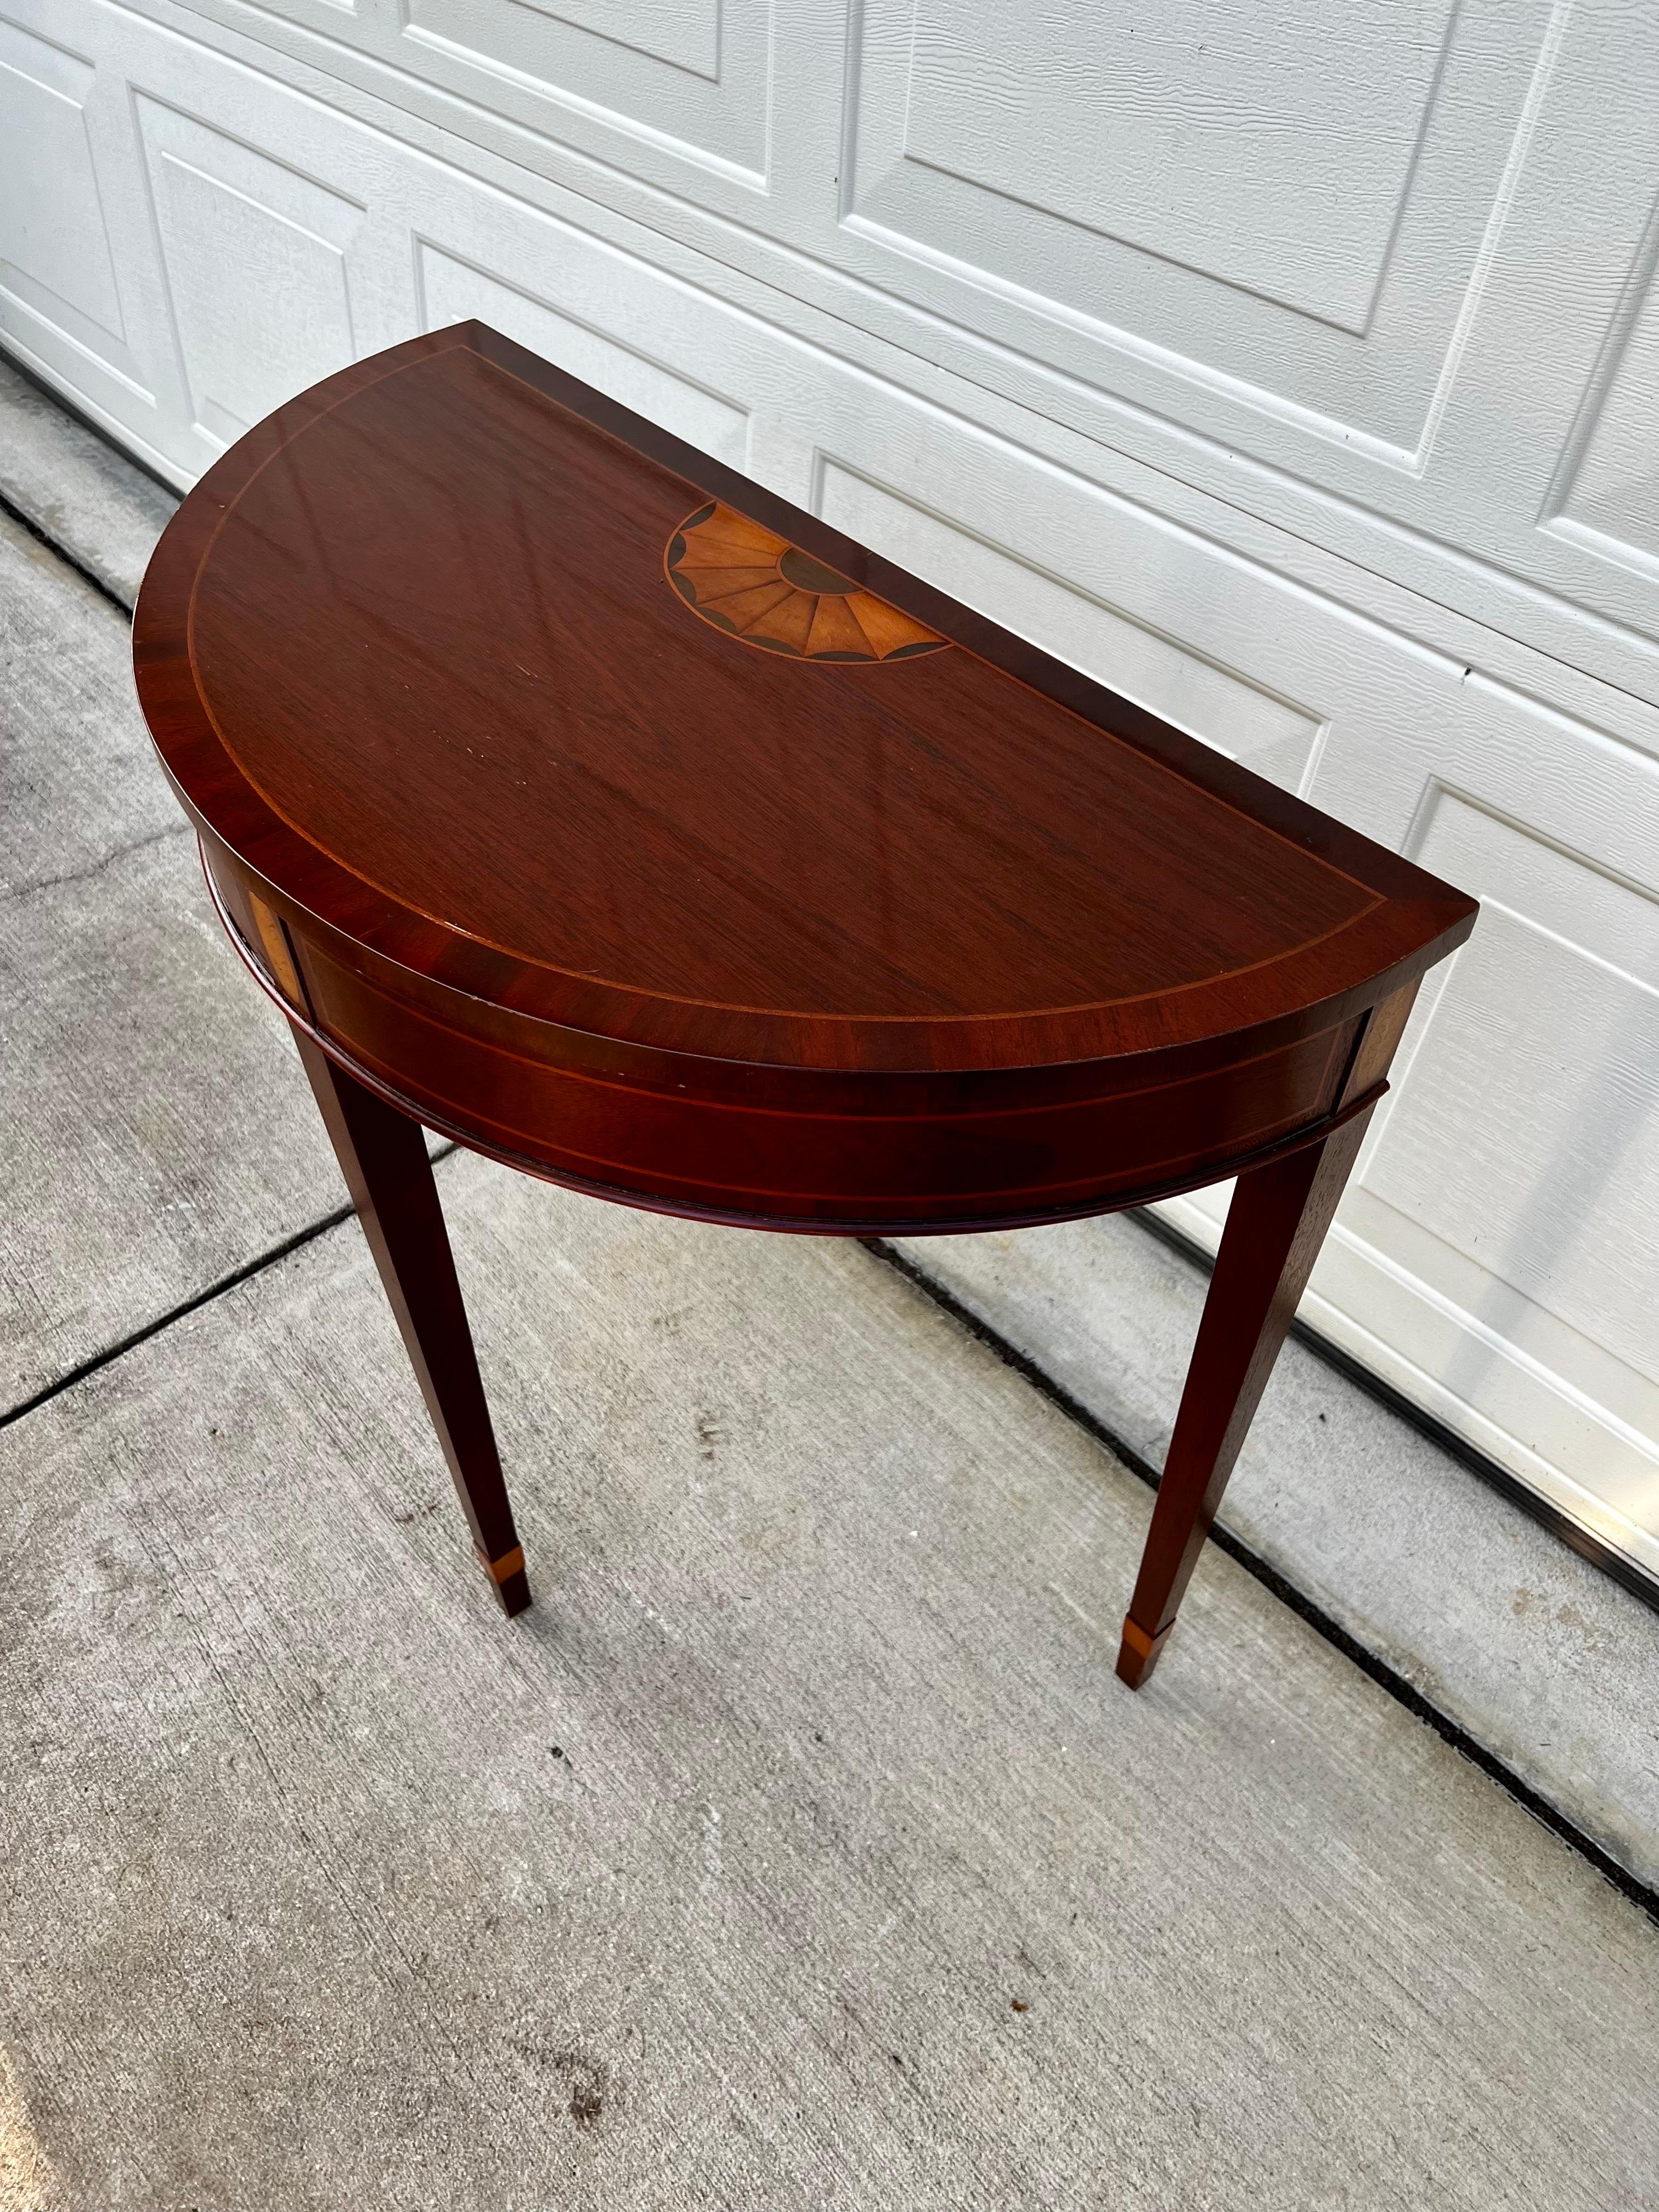 An exceptional petite Hepplewhite or Federal style demilune console table or entry table be Baker Furniture Company.